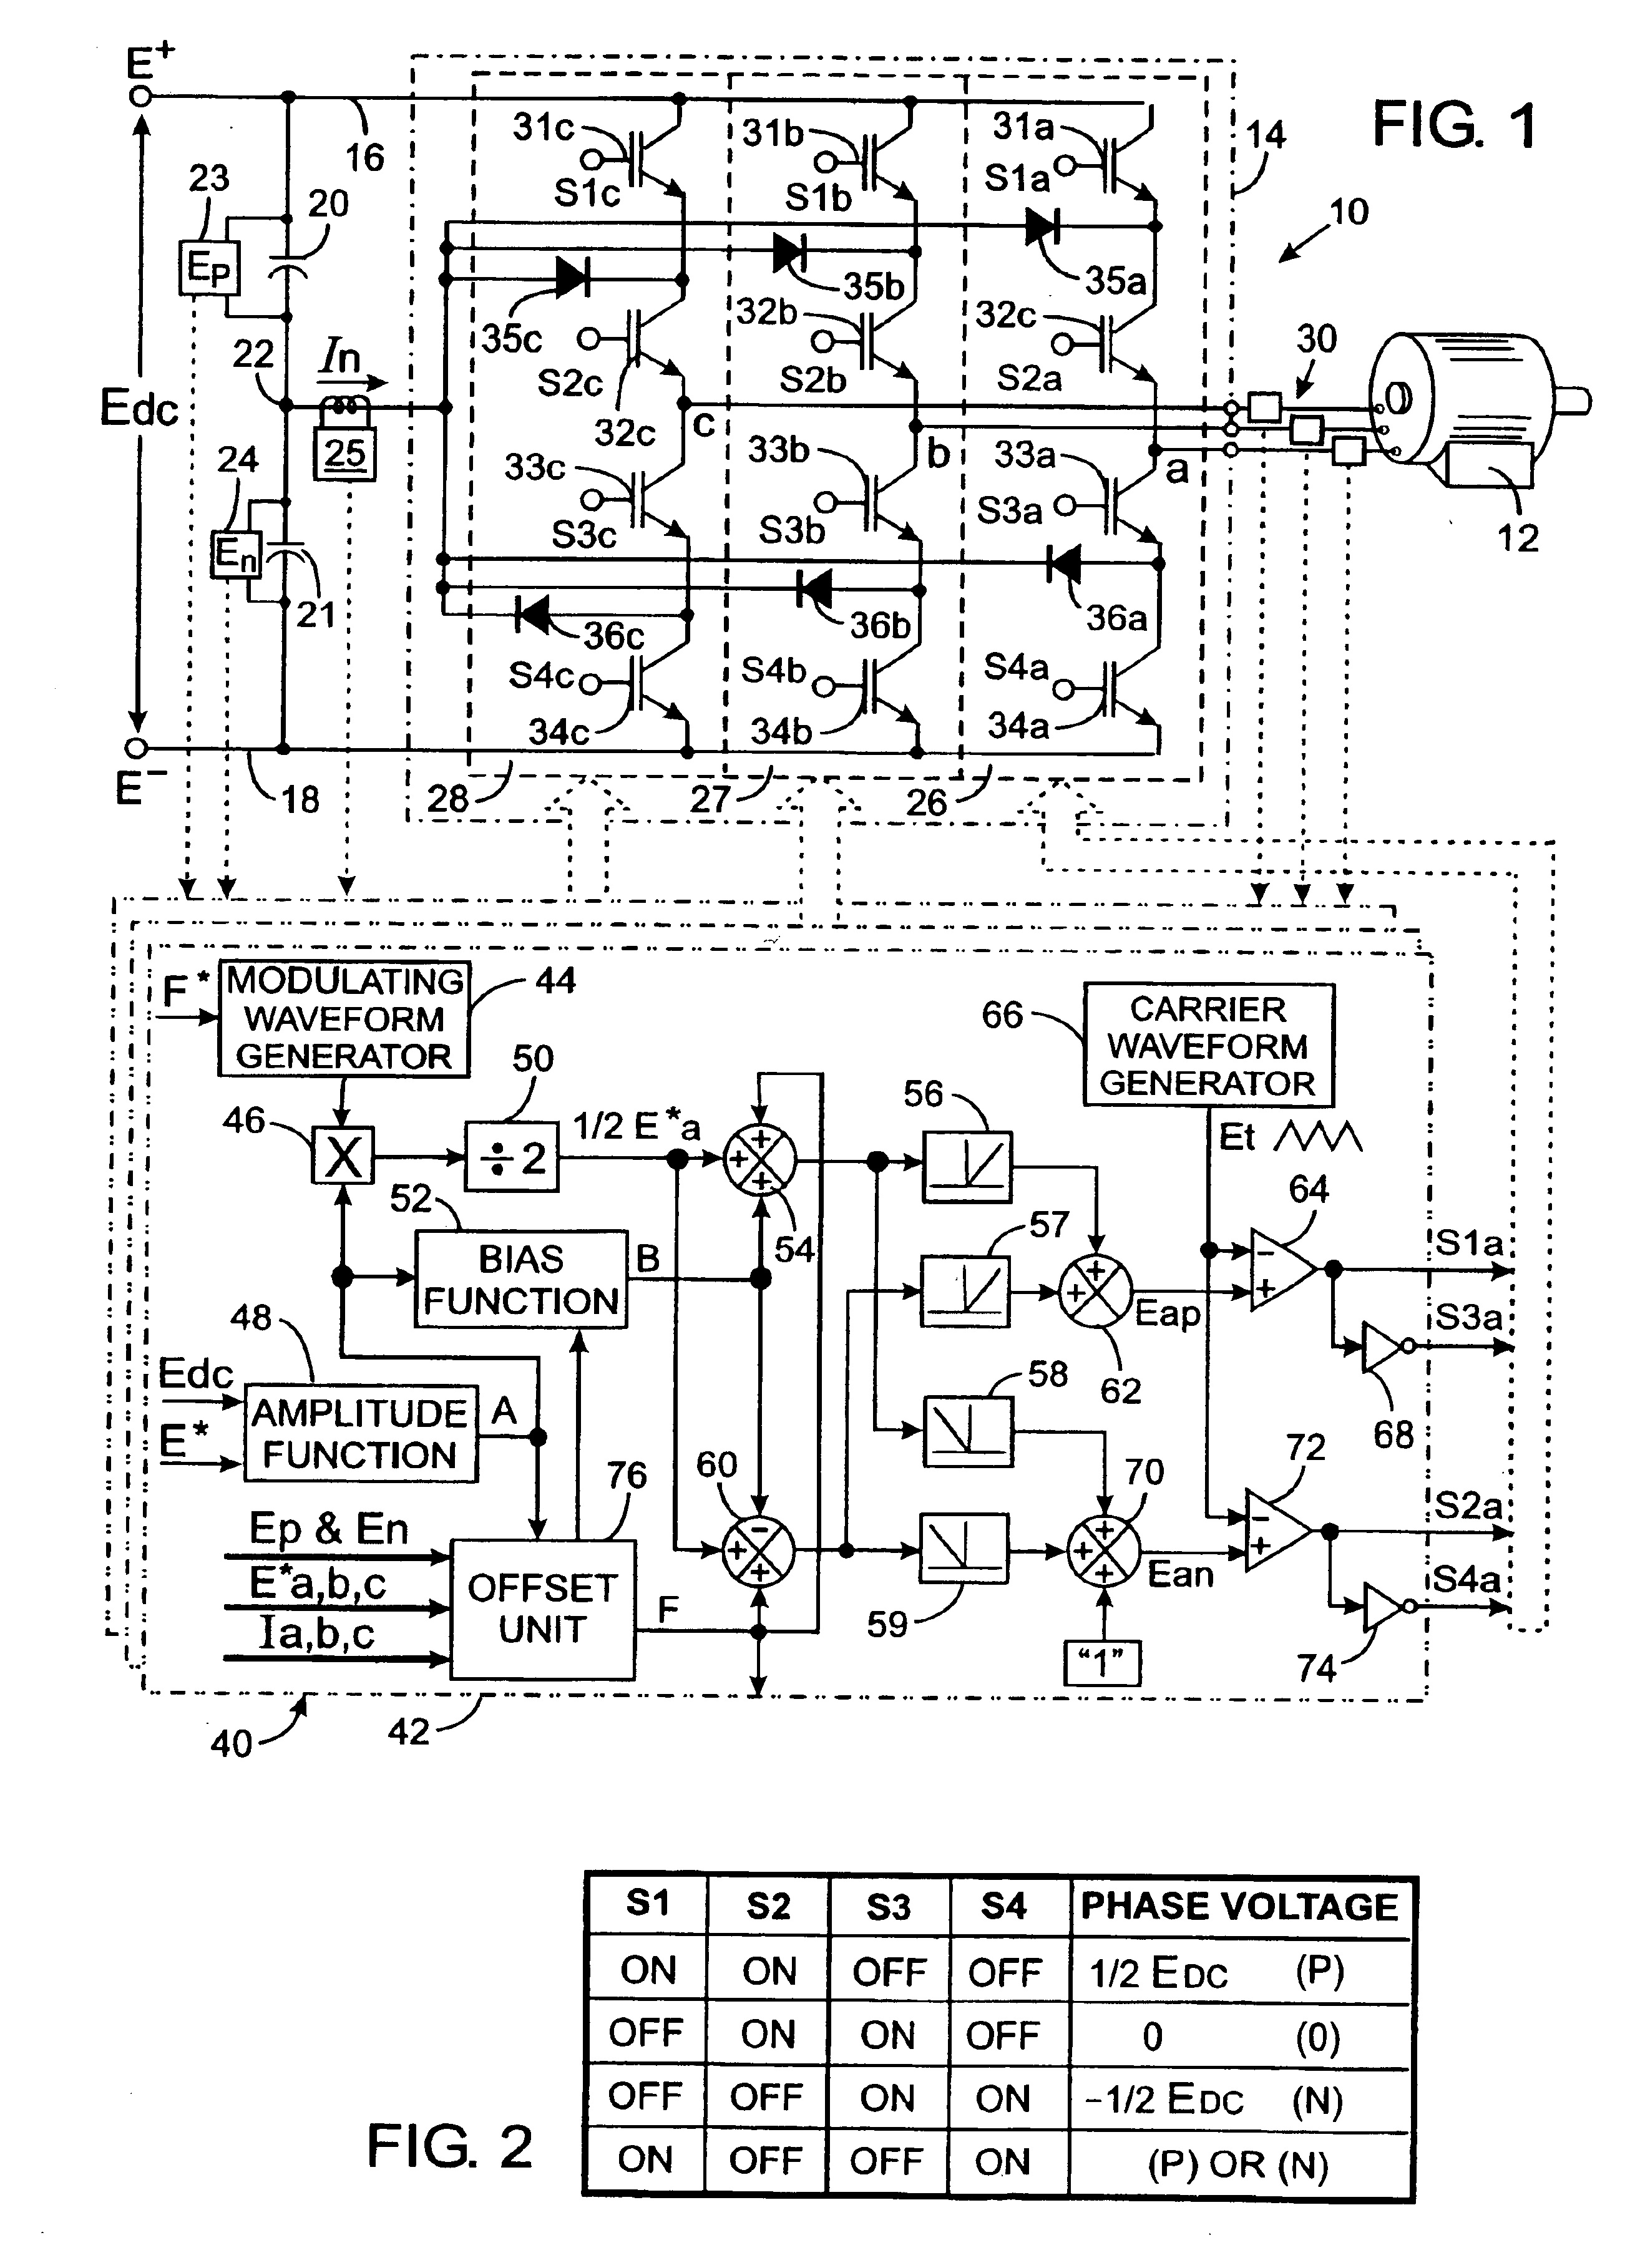 Capacitor charge balancing technique for a three-level PWM power converter